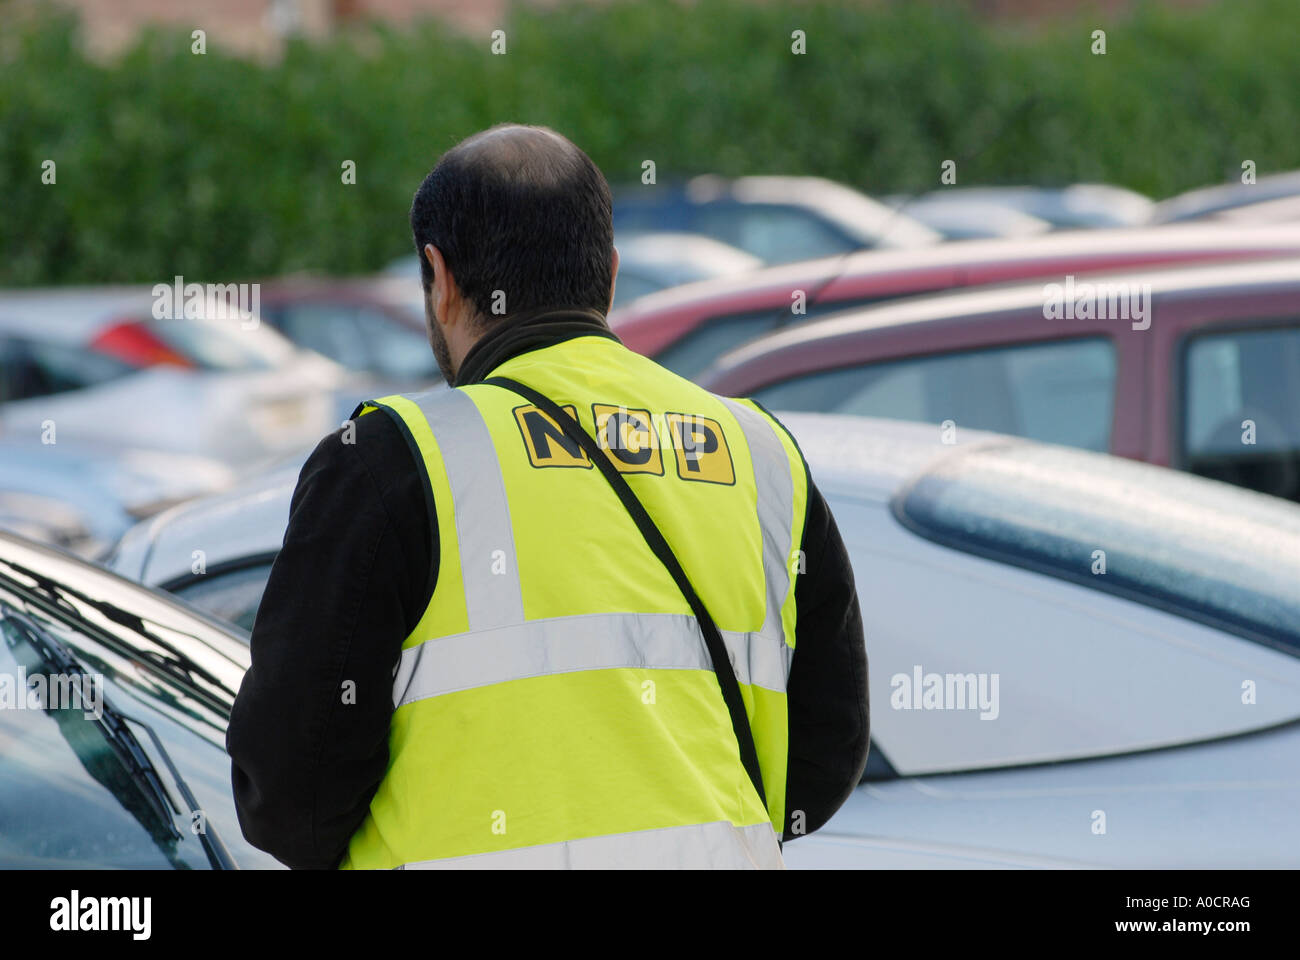 NCP car park attendant checking tickets in a car park in England. Stock Photo